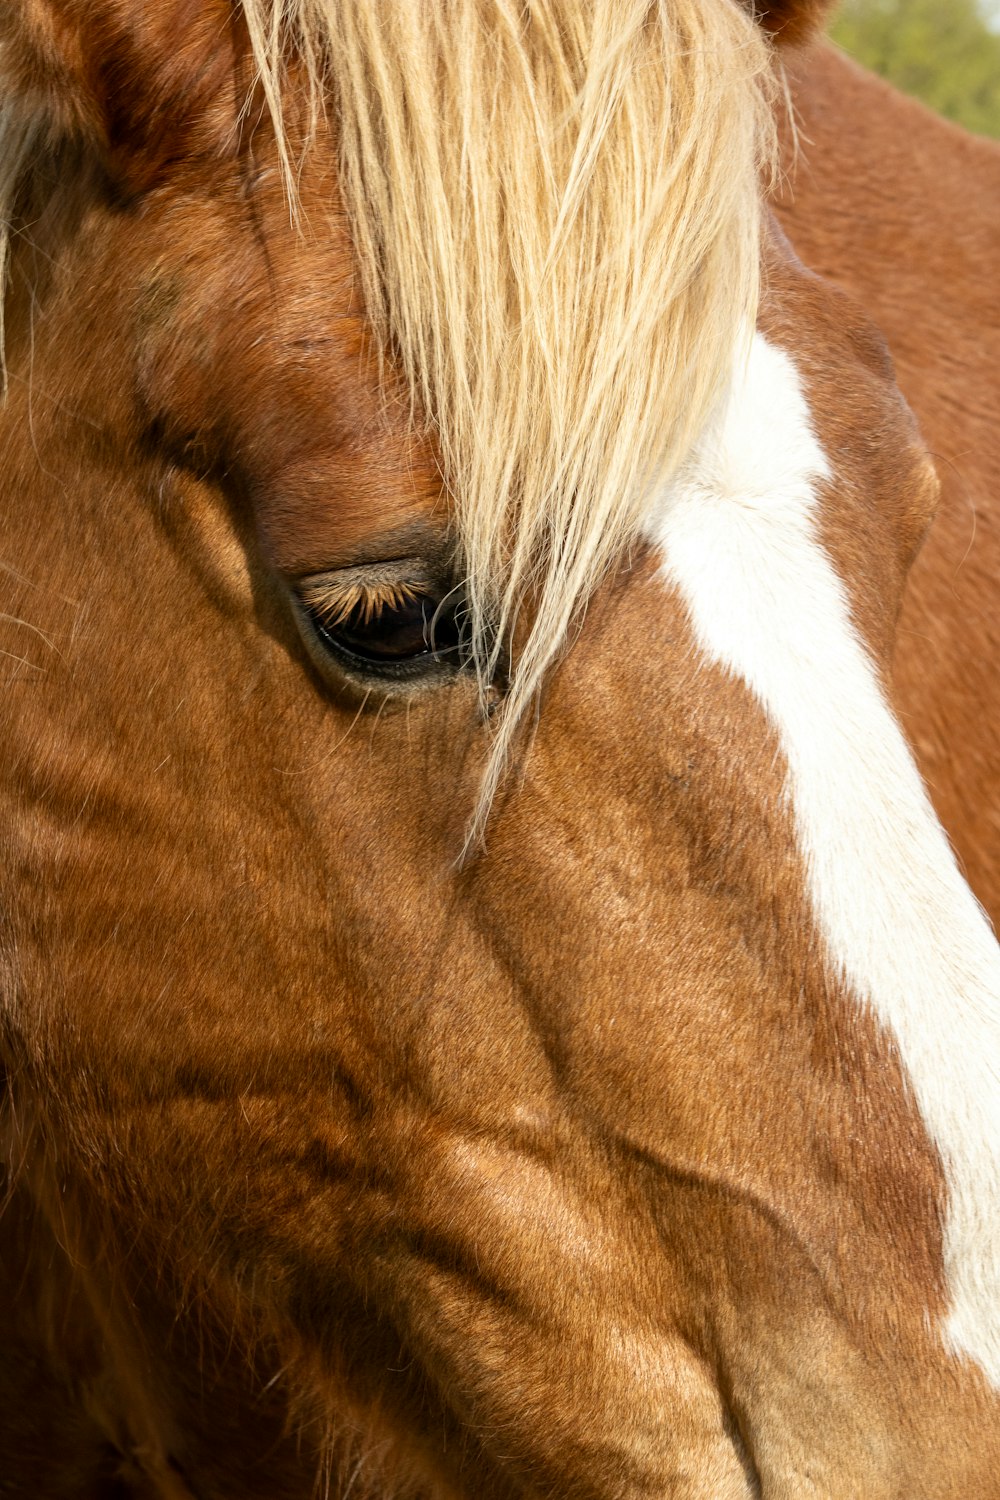 a close up of a brown and white horse